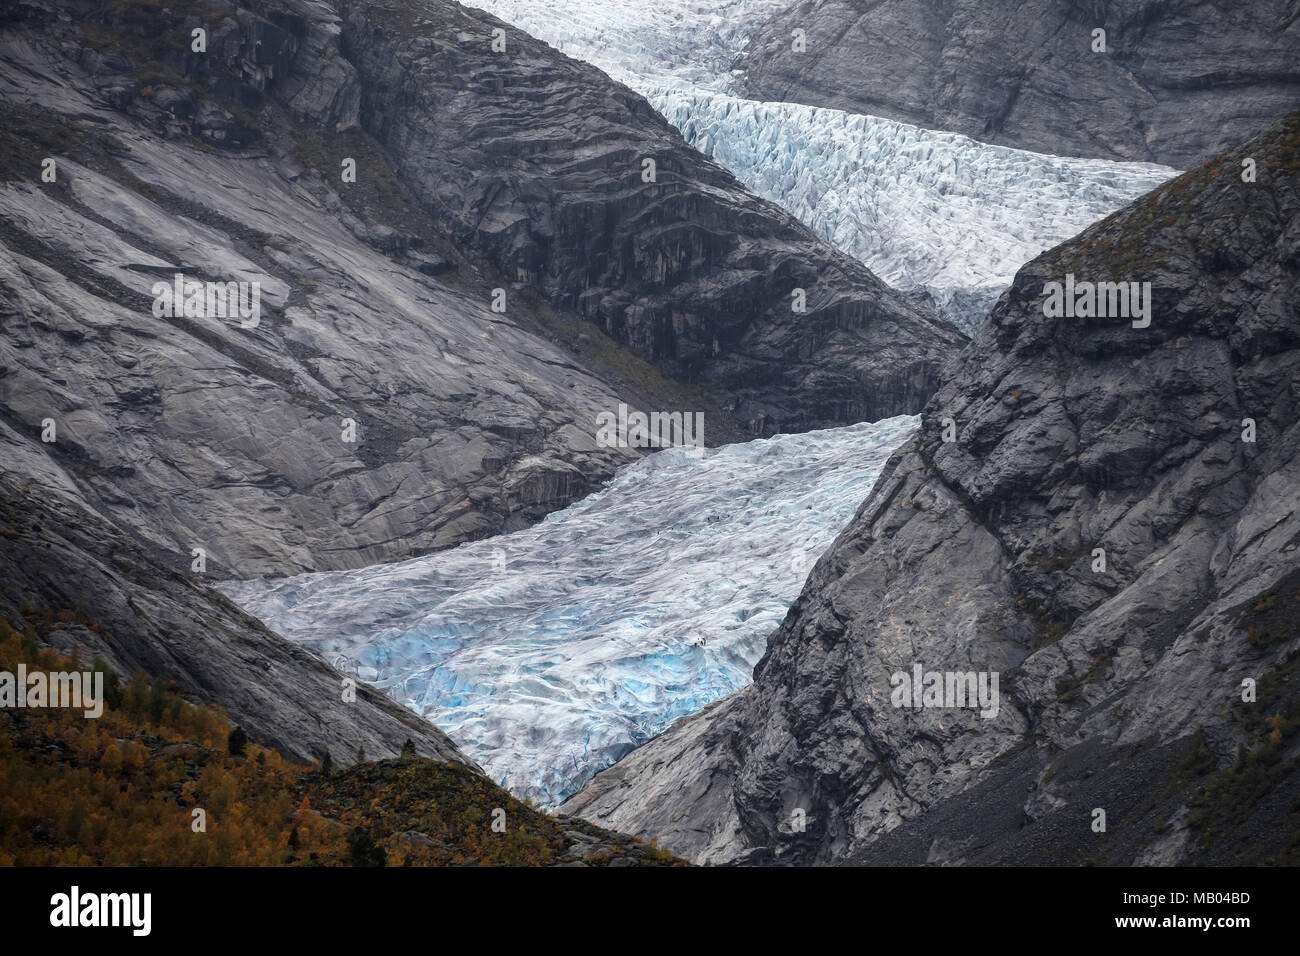 Nigard Glacier Tongue, Jostedalsbreen National Park, Norway. Stock Photo